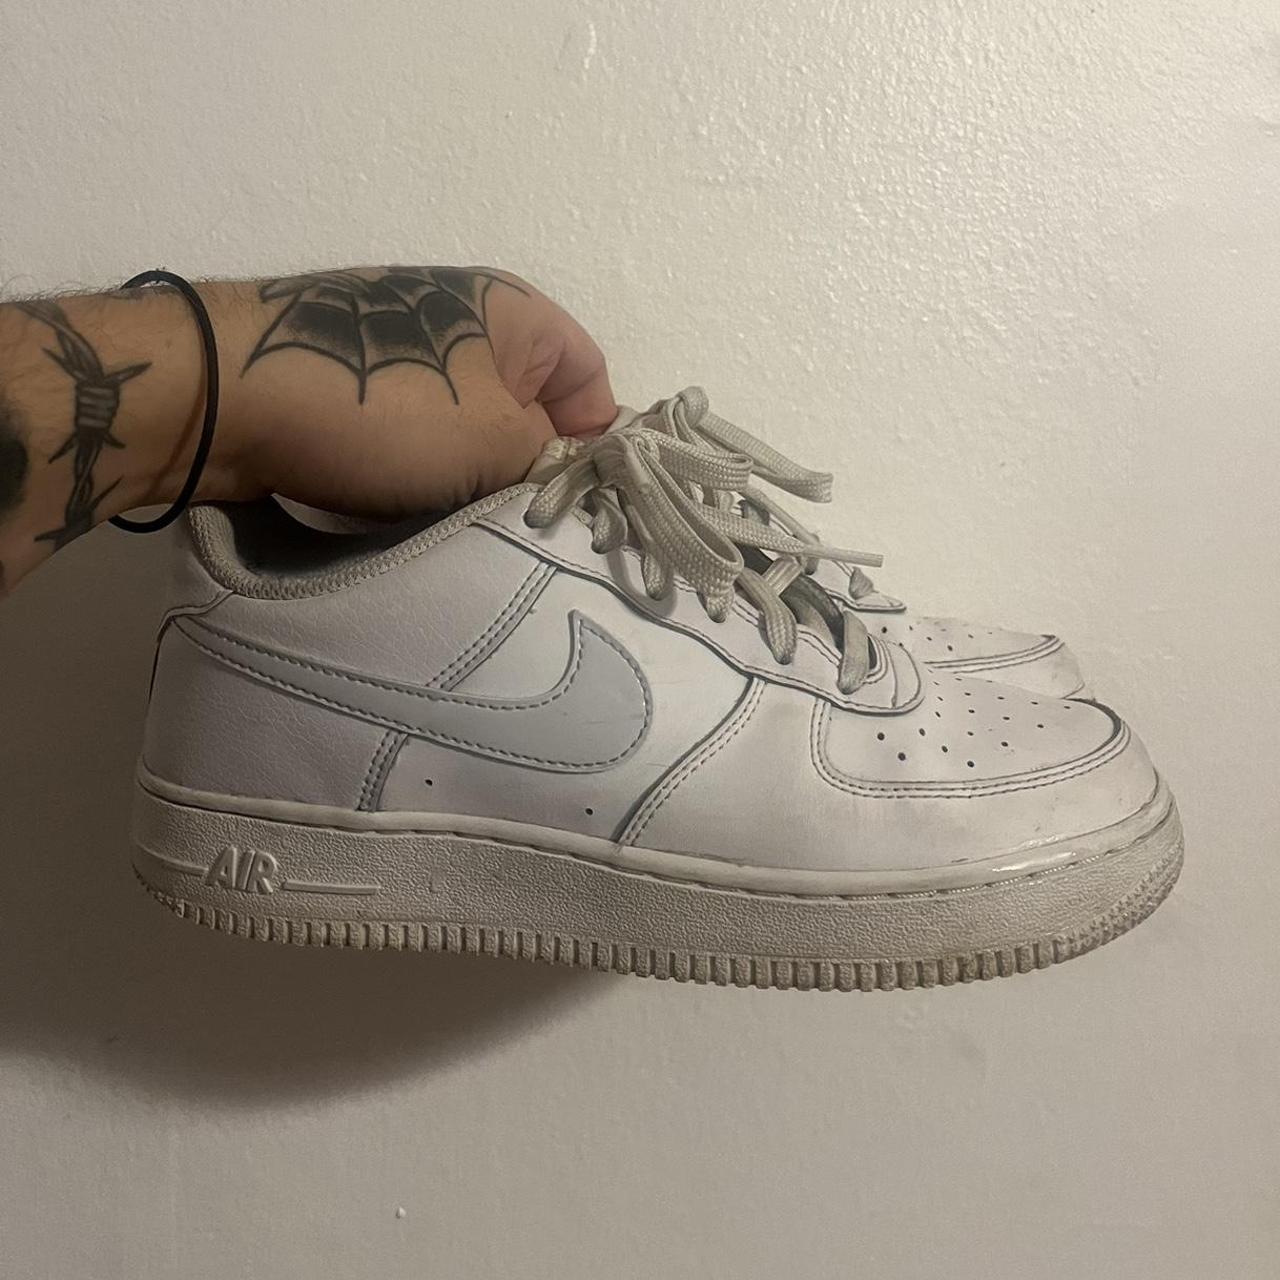 Nike Air Force 1 original from 2001. Size 9 with - Depop